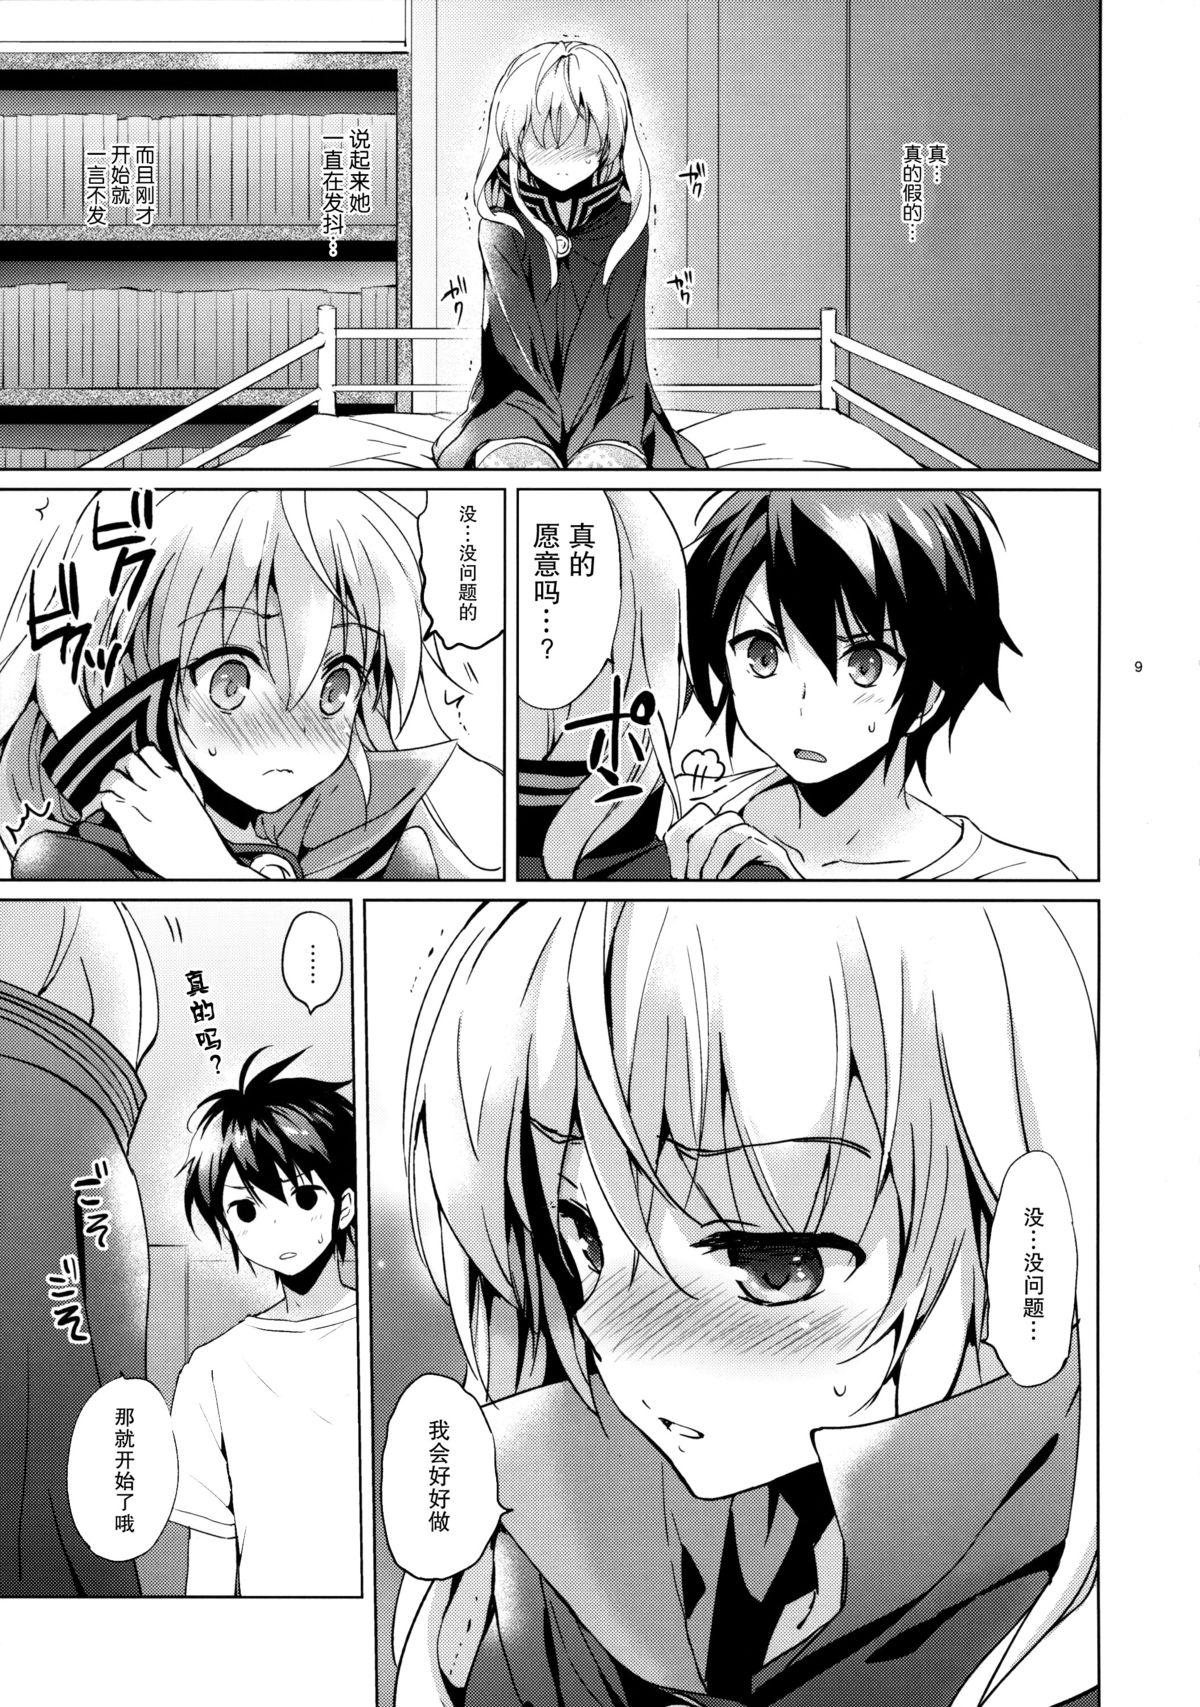 Vietnamese Mitsuba Love Story - Seraph of the end Joven - Page 8